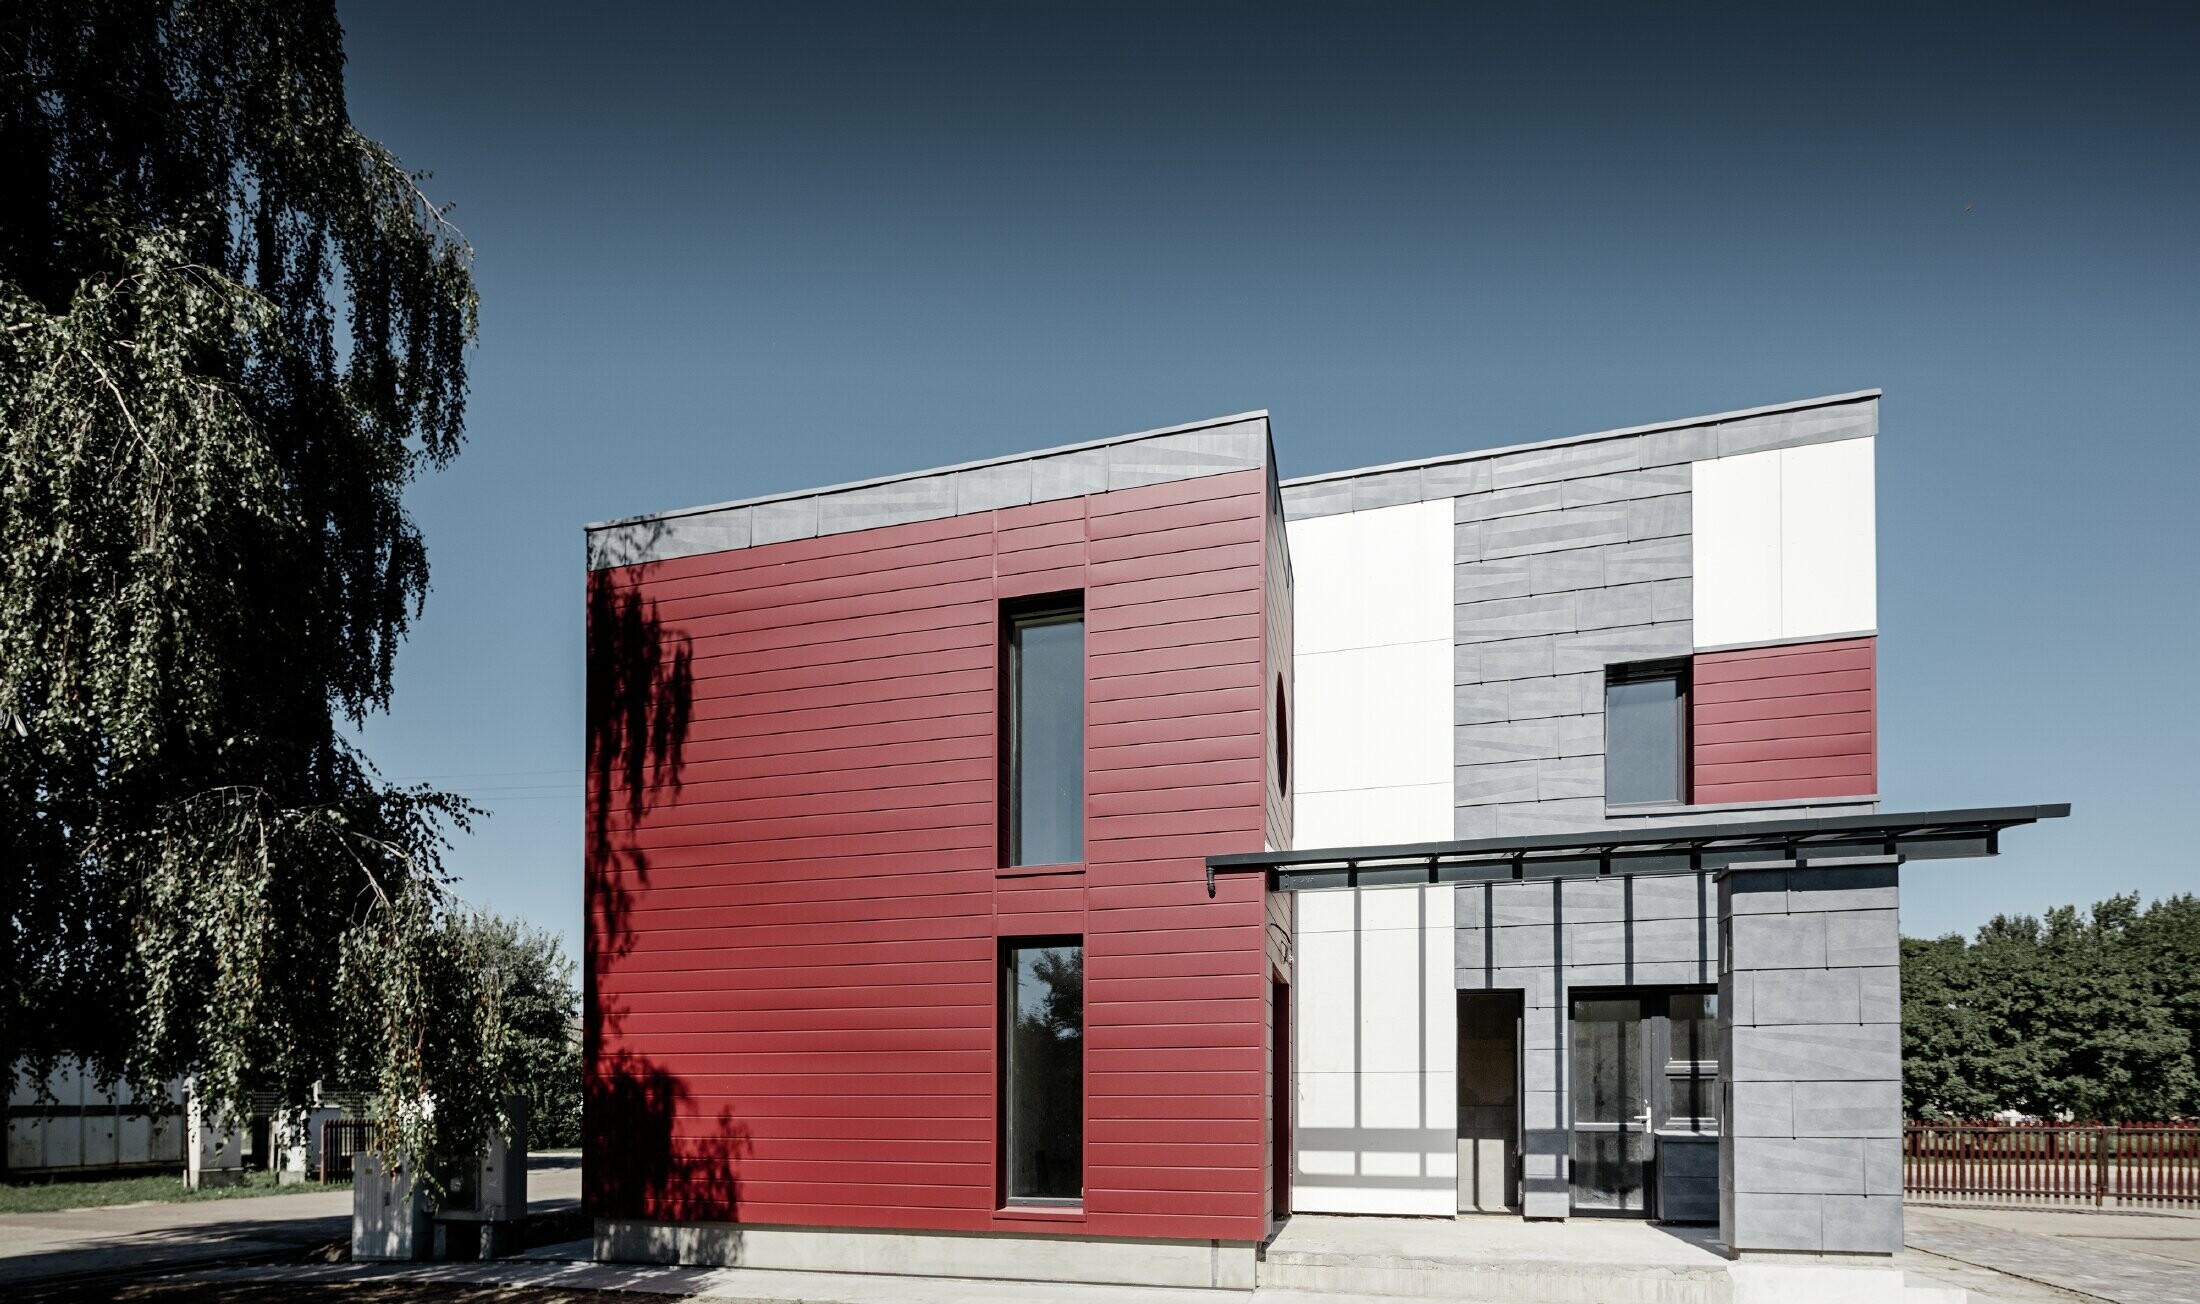 Modern office building with a divided façade in red, stone grey and white, and sidings, FX.12 façade panels and aluminium composite panels made by PREFA Aluminiumprodukte GmbH